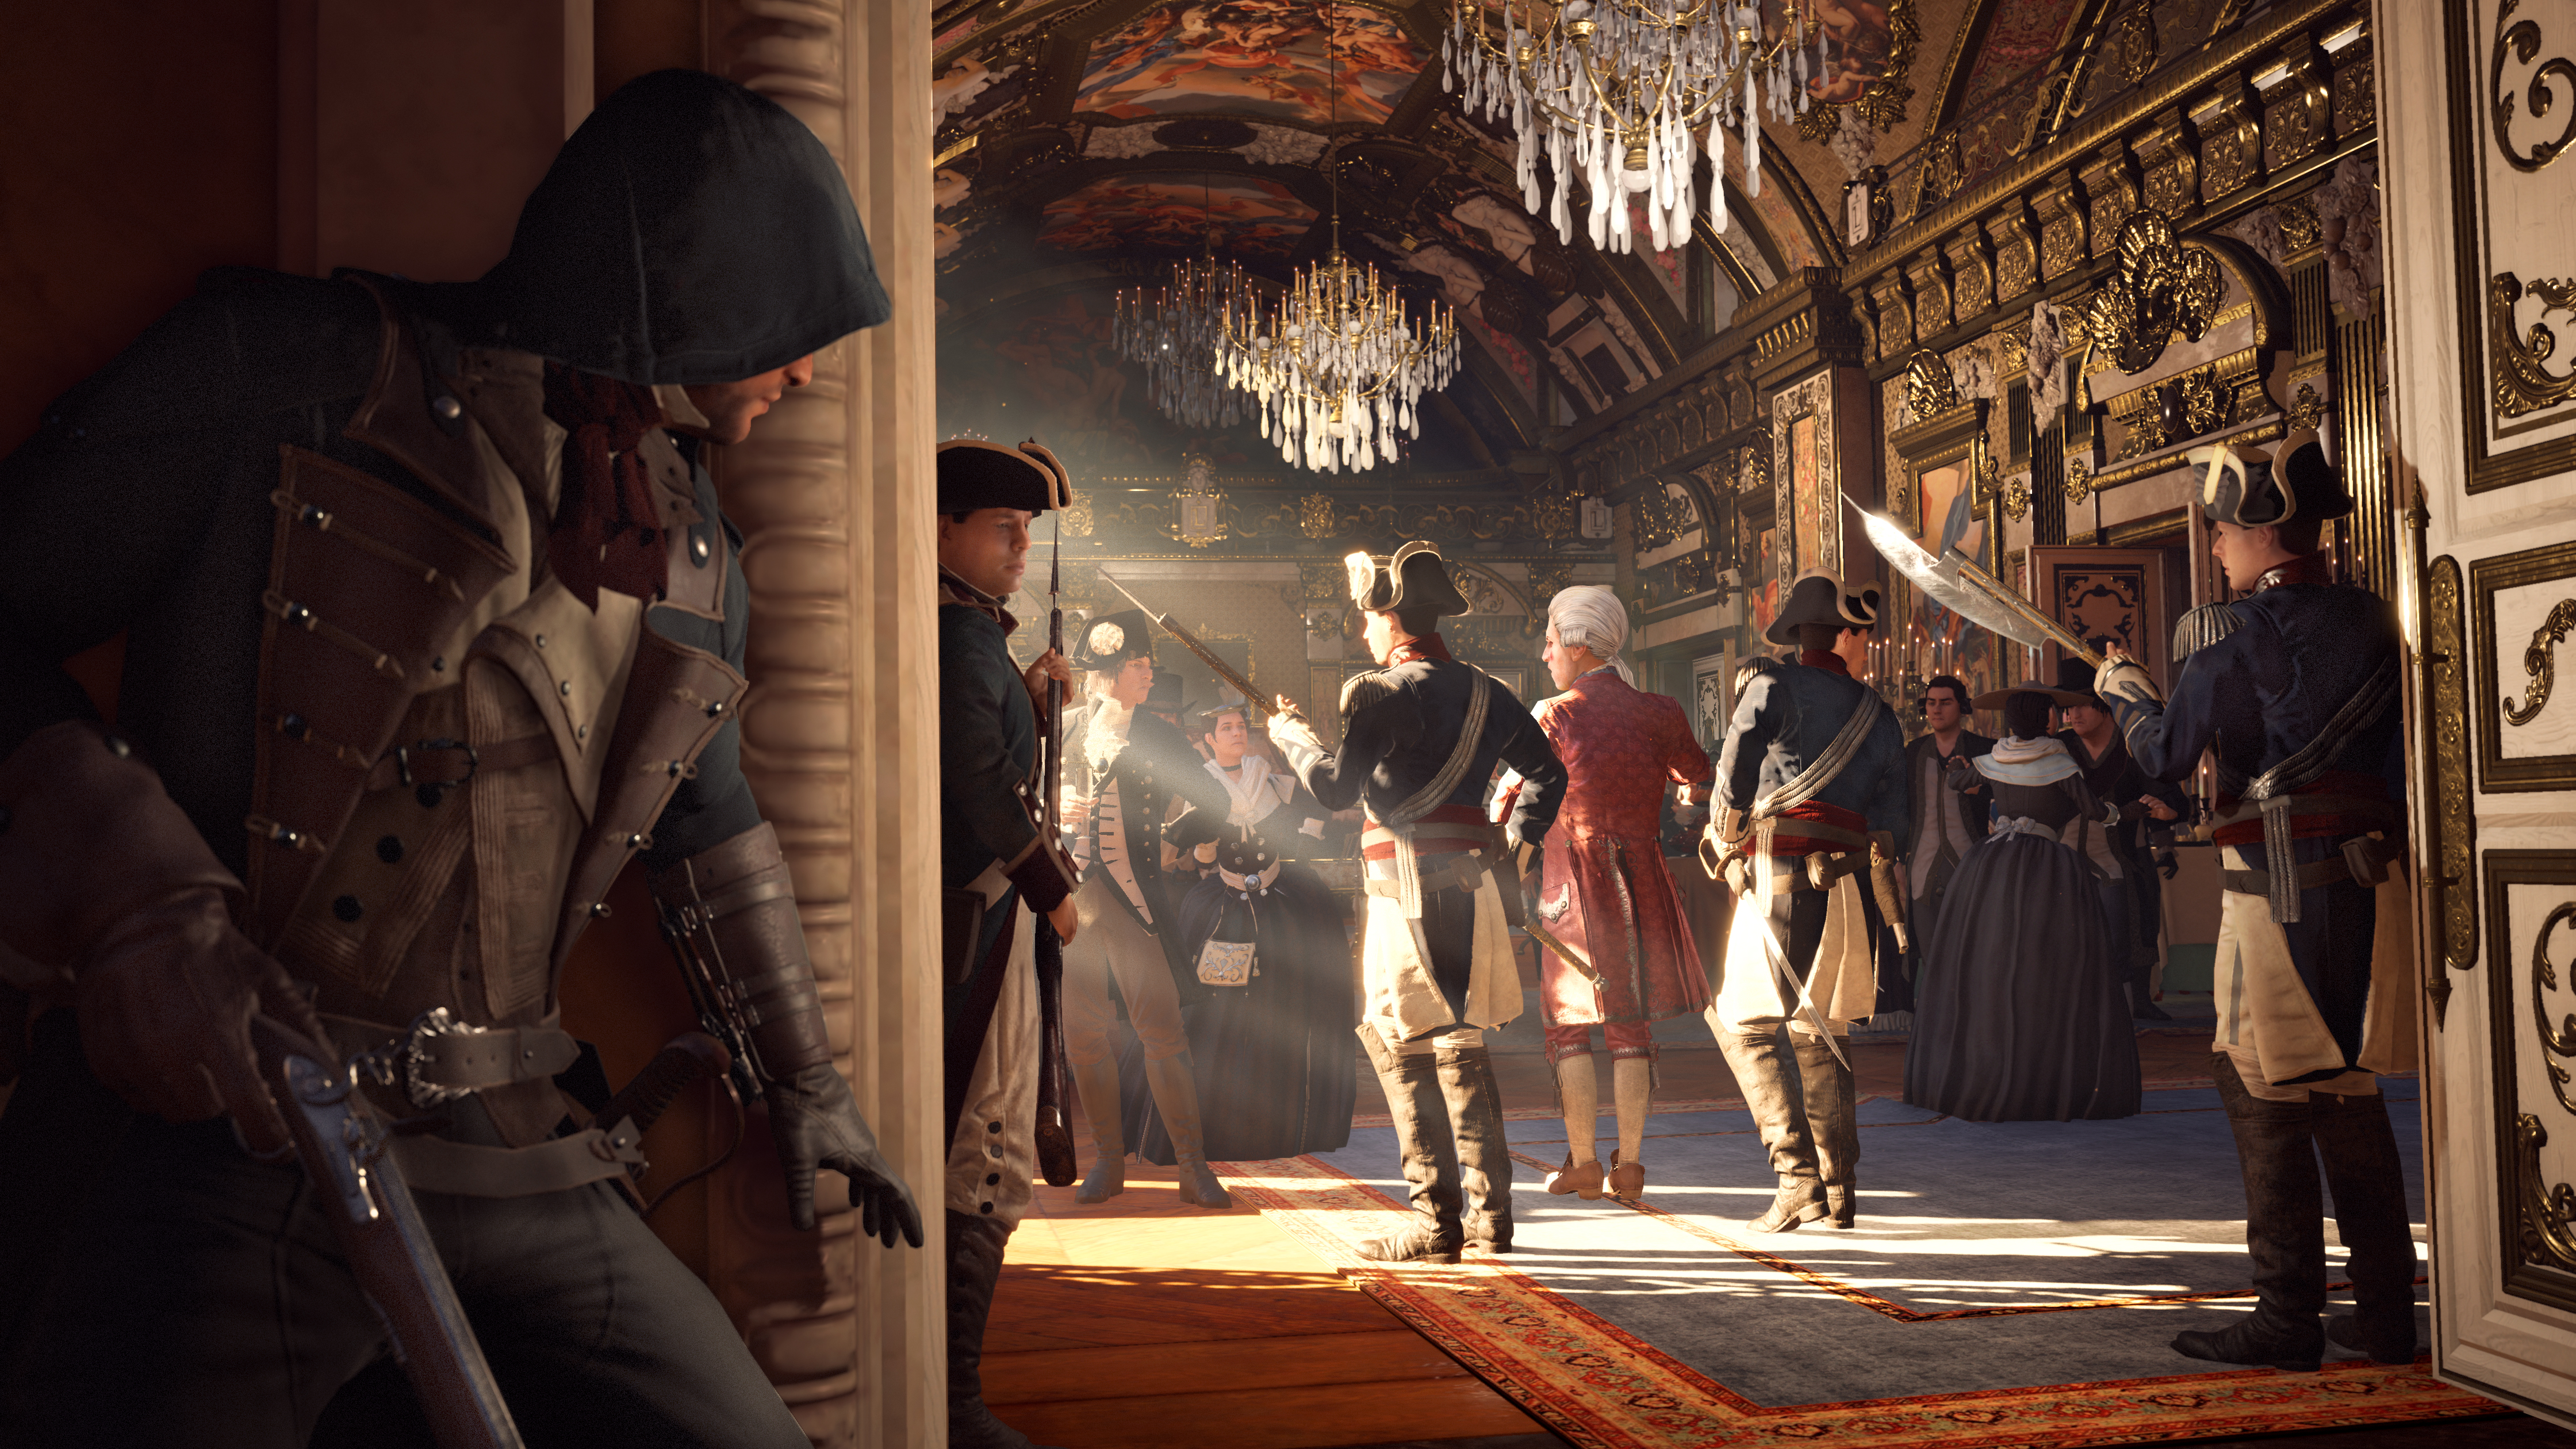 On June 9th, Ubisoft announced new details on the latest edition in their Assassin's Creed franchise. (Ubisoft)